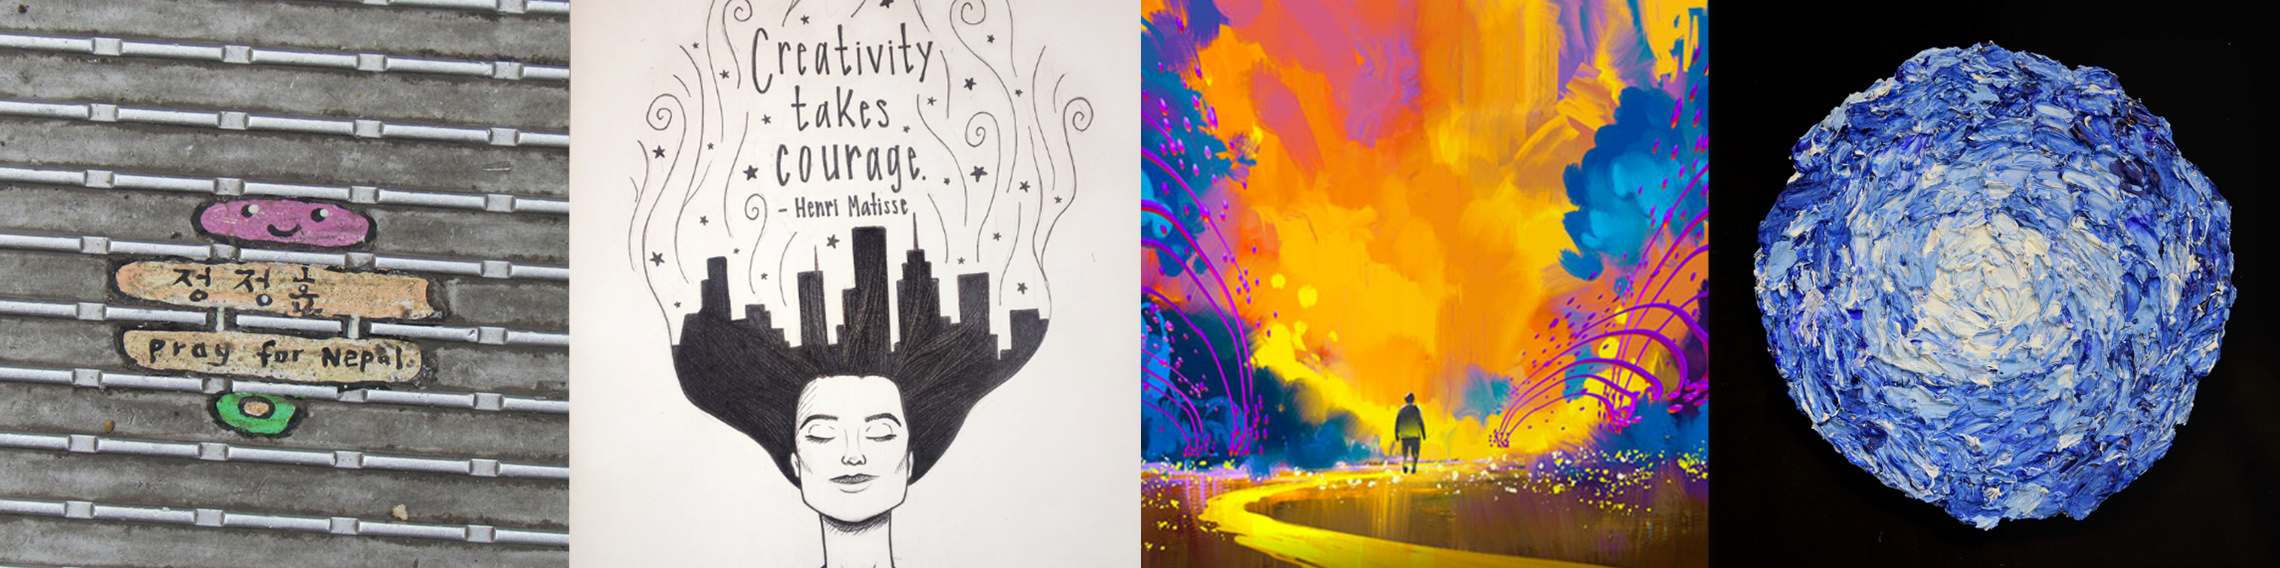 4 illustrations of what creativity means.